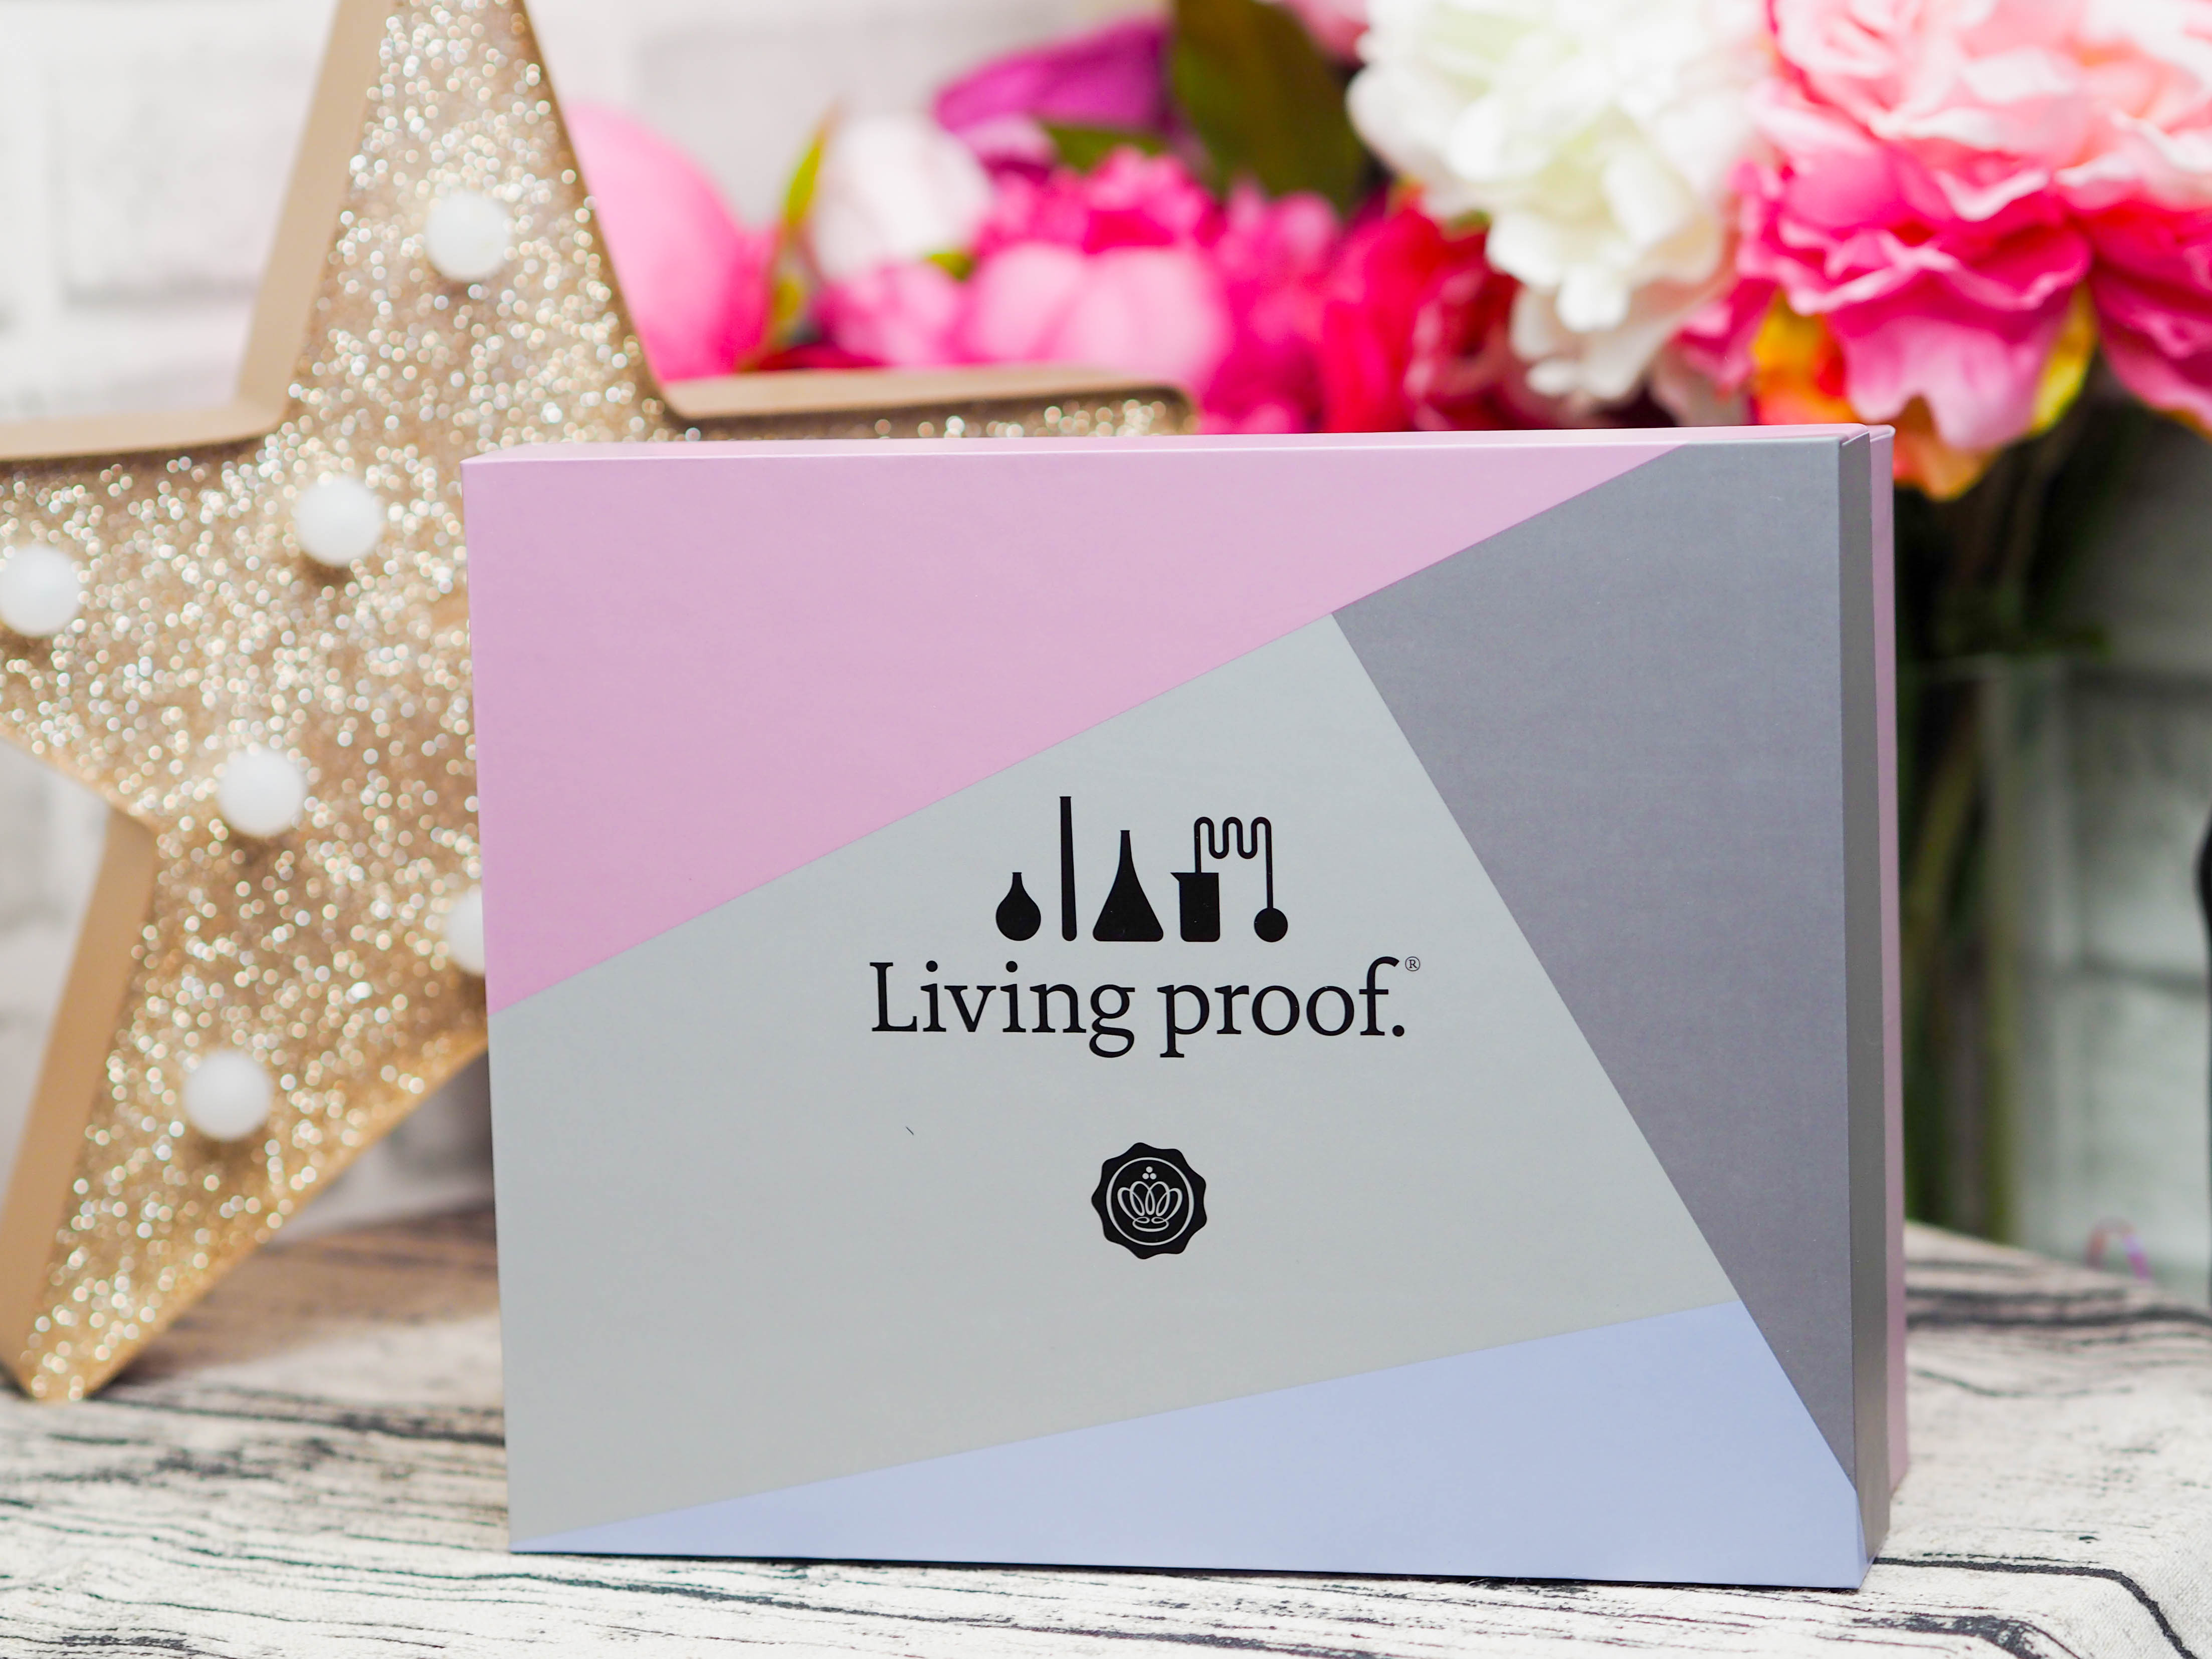 Glossybox x Living Proof Limited Edition Box 